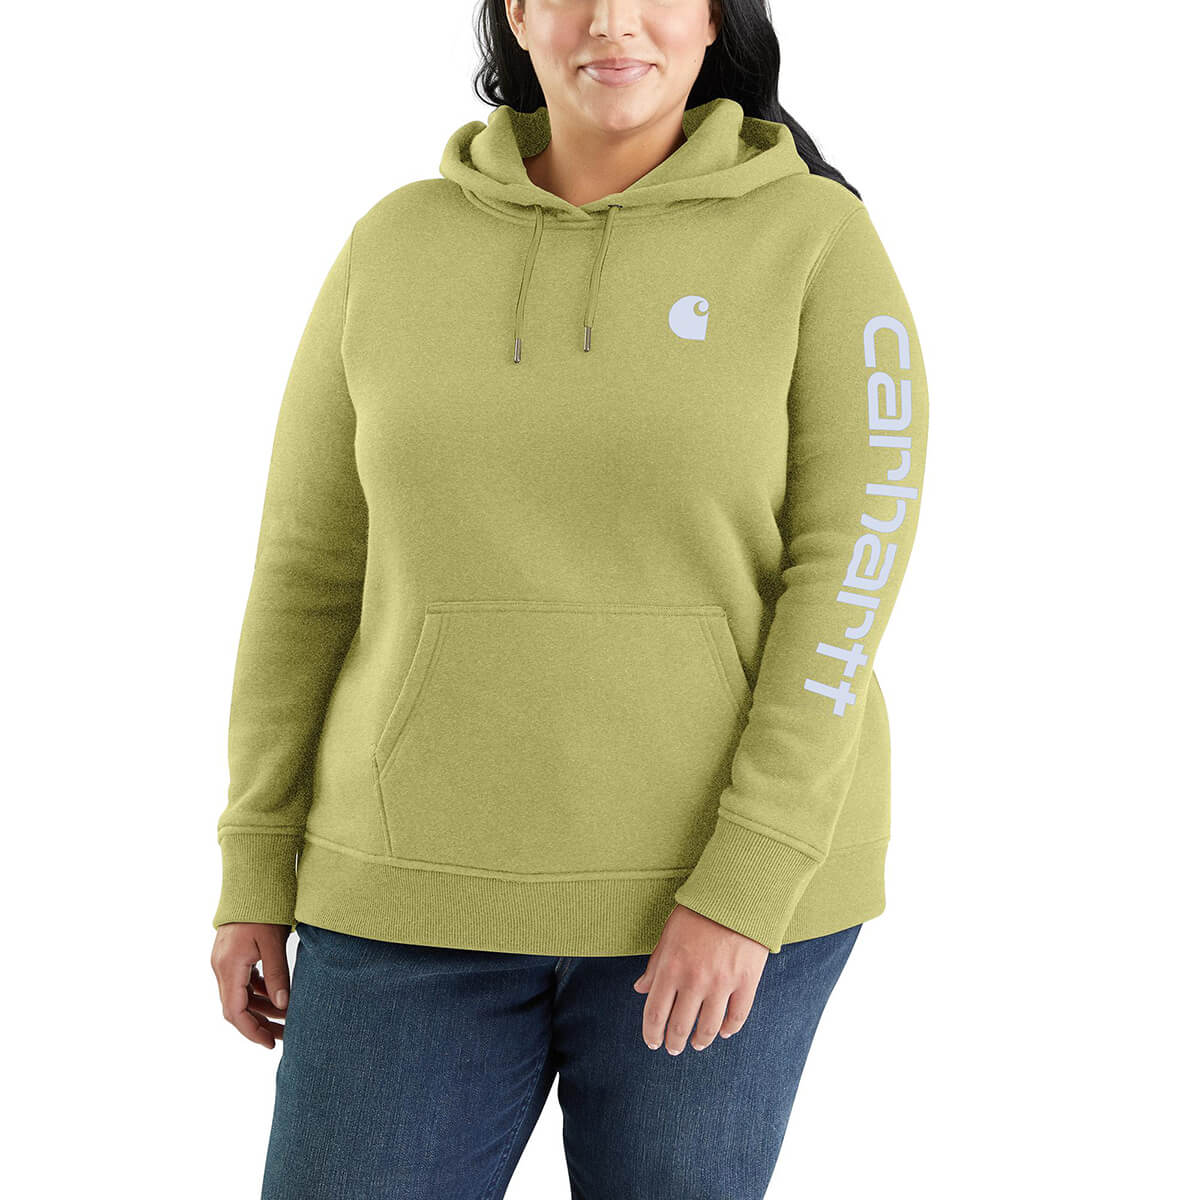 Carhartt Relaxed Fit Midweight Logo Sleeve Graphic Sweatshirt - Olive